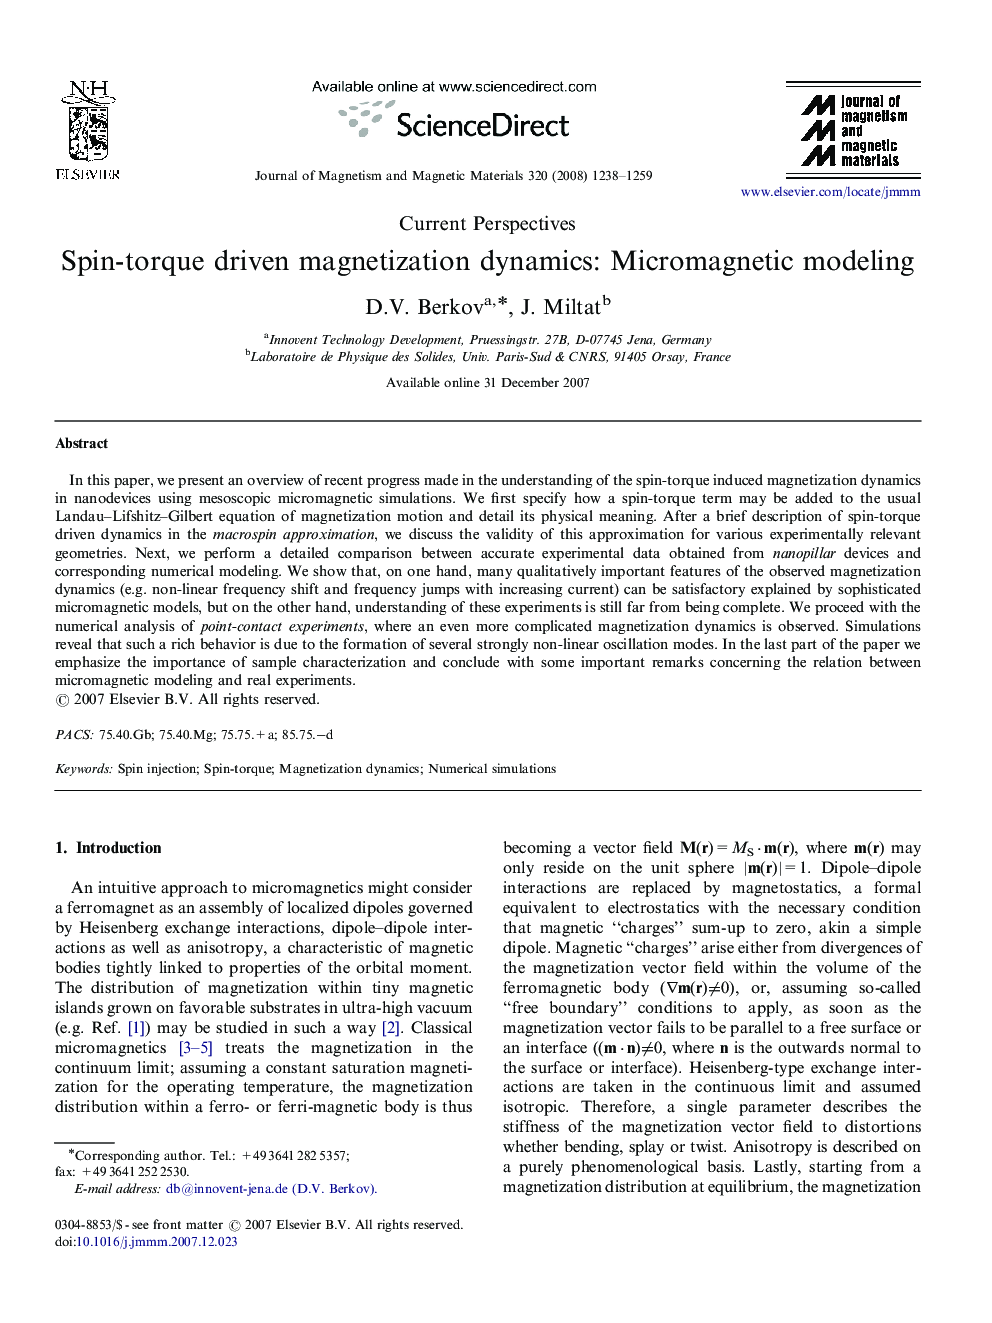 Spin-torque driven magnetization dynamics: Micromagnetic modeling